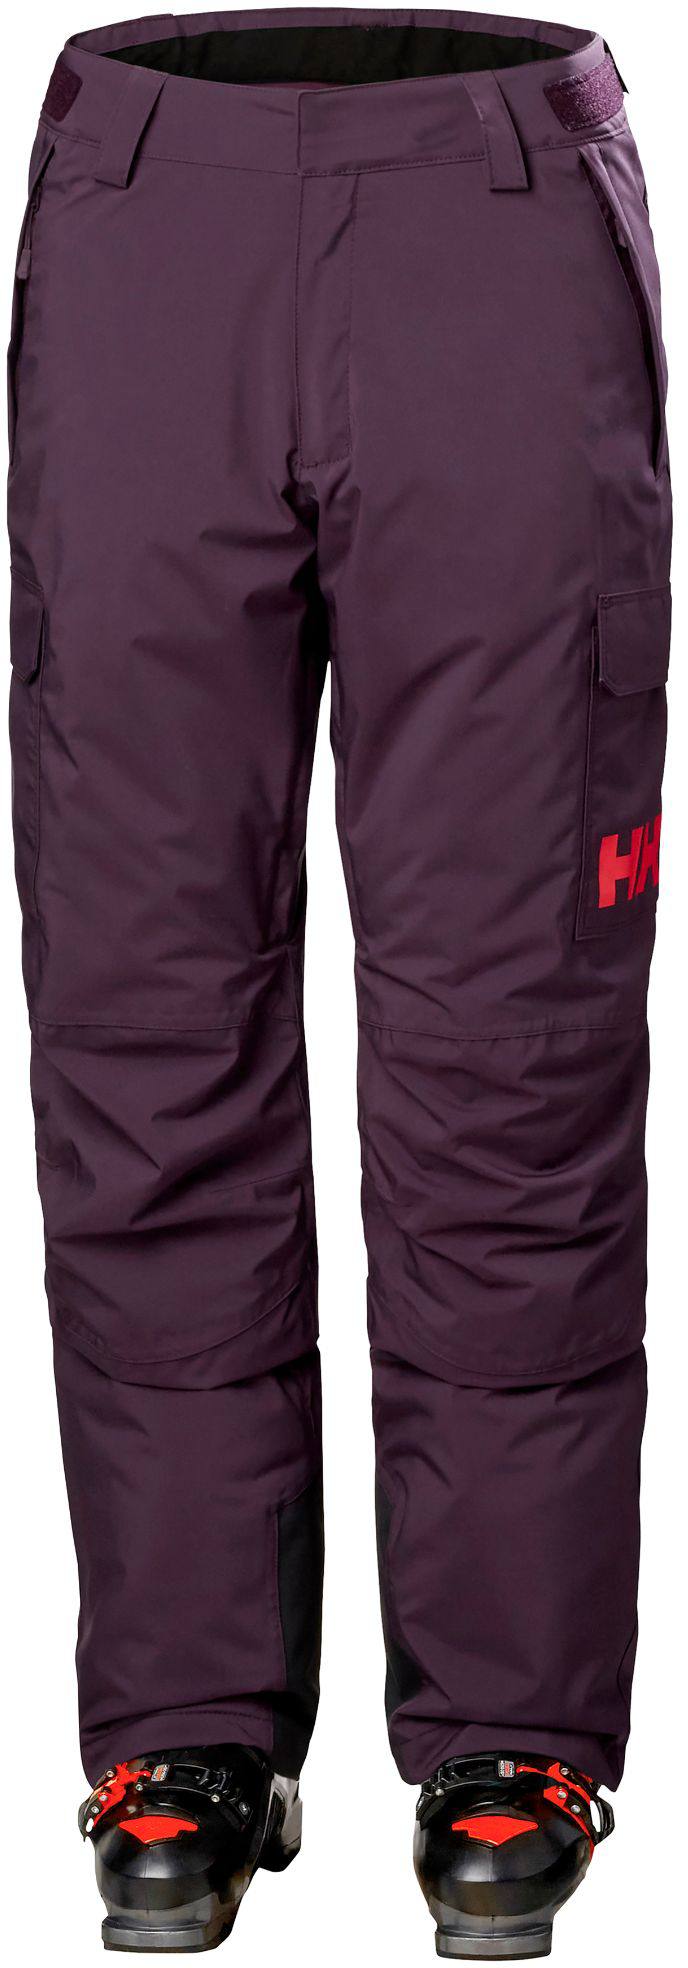 Women’s Switch Cargo Insulated Pant Amethyst XL